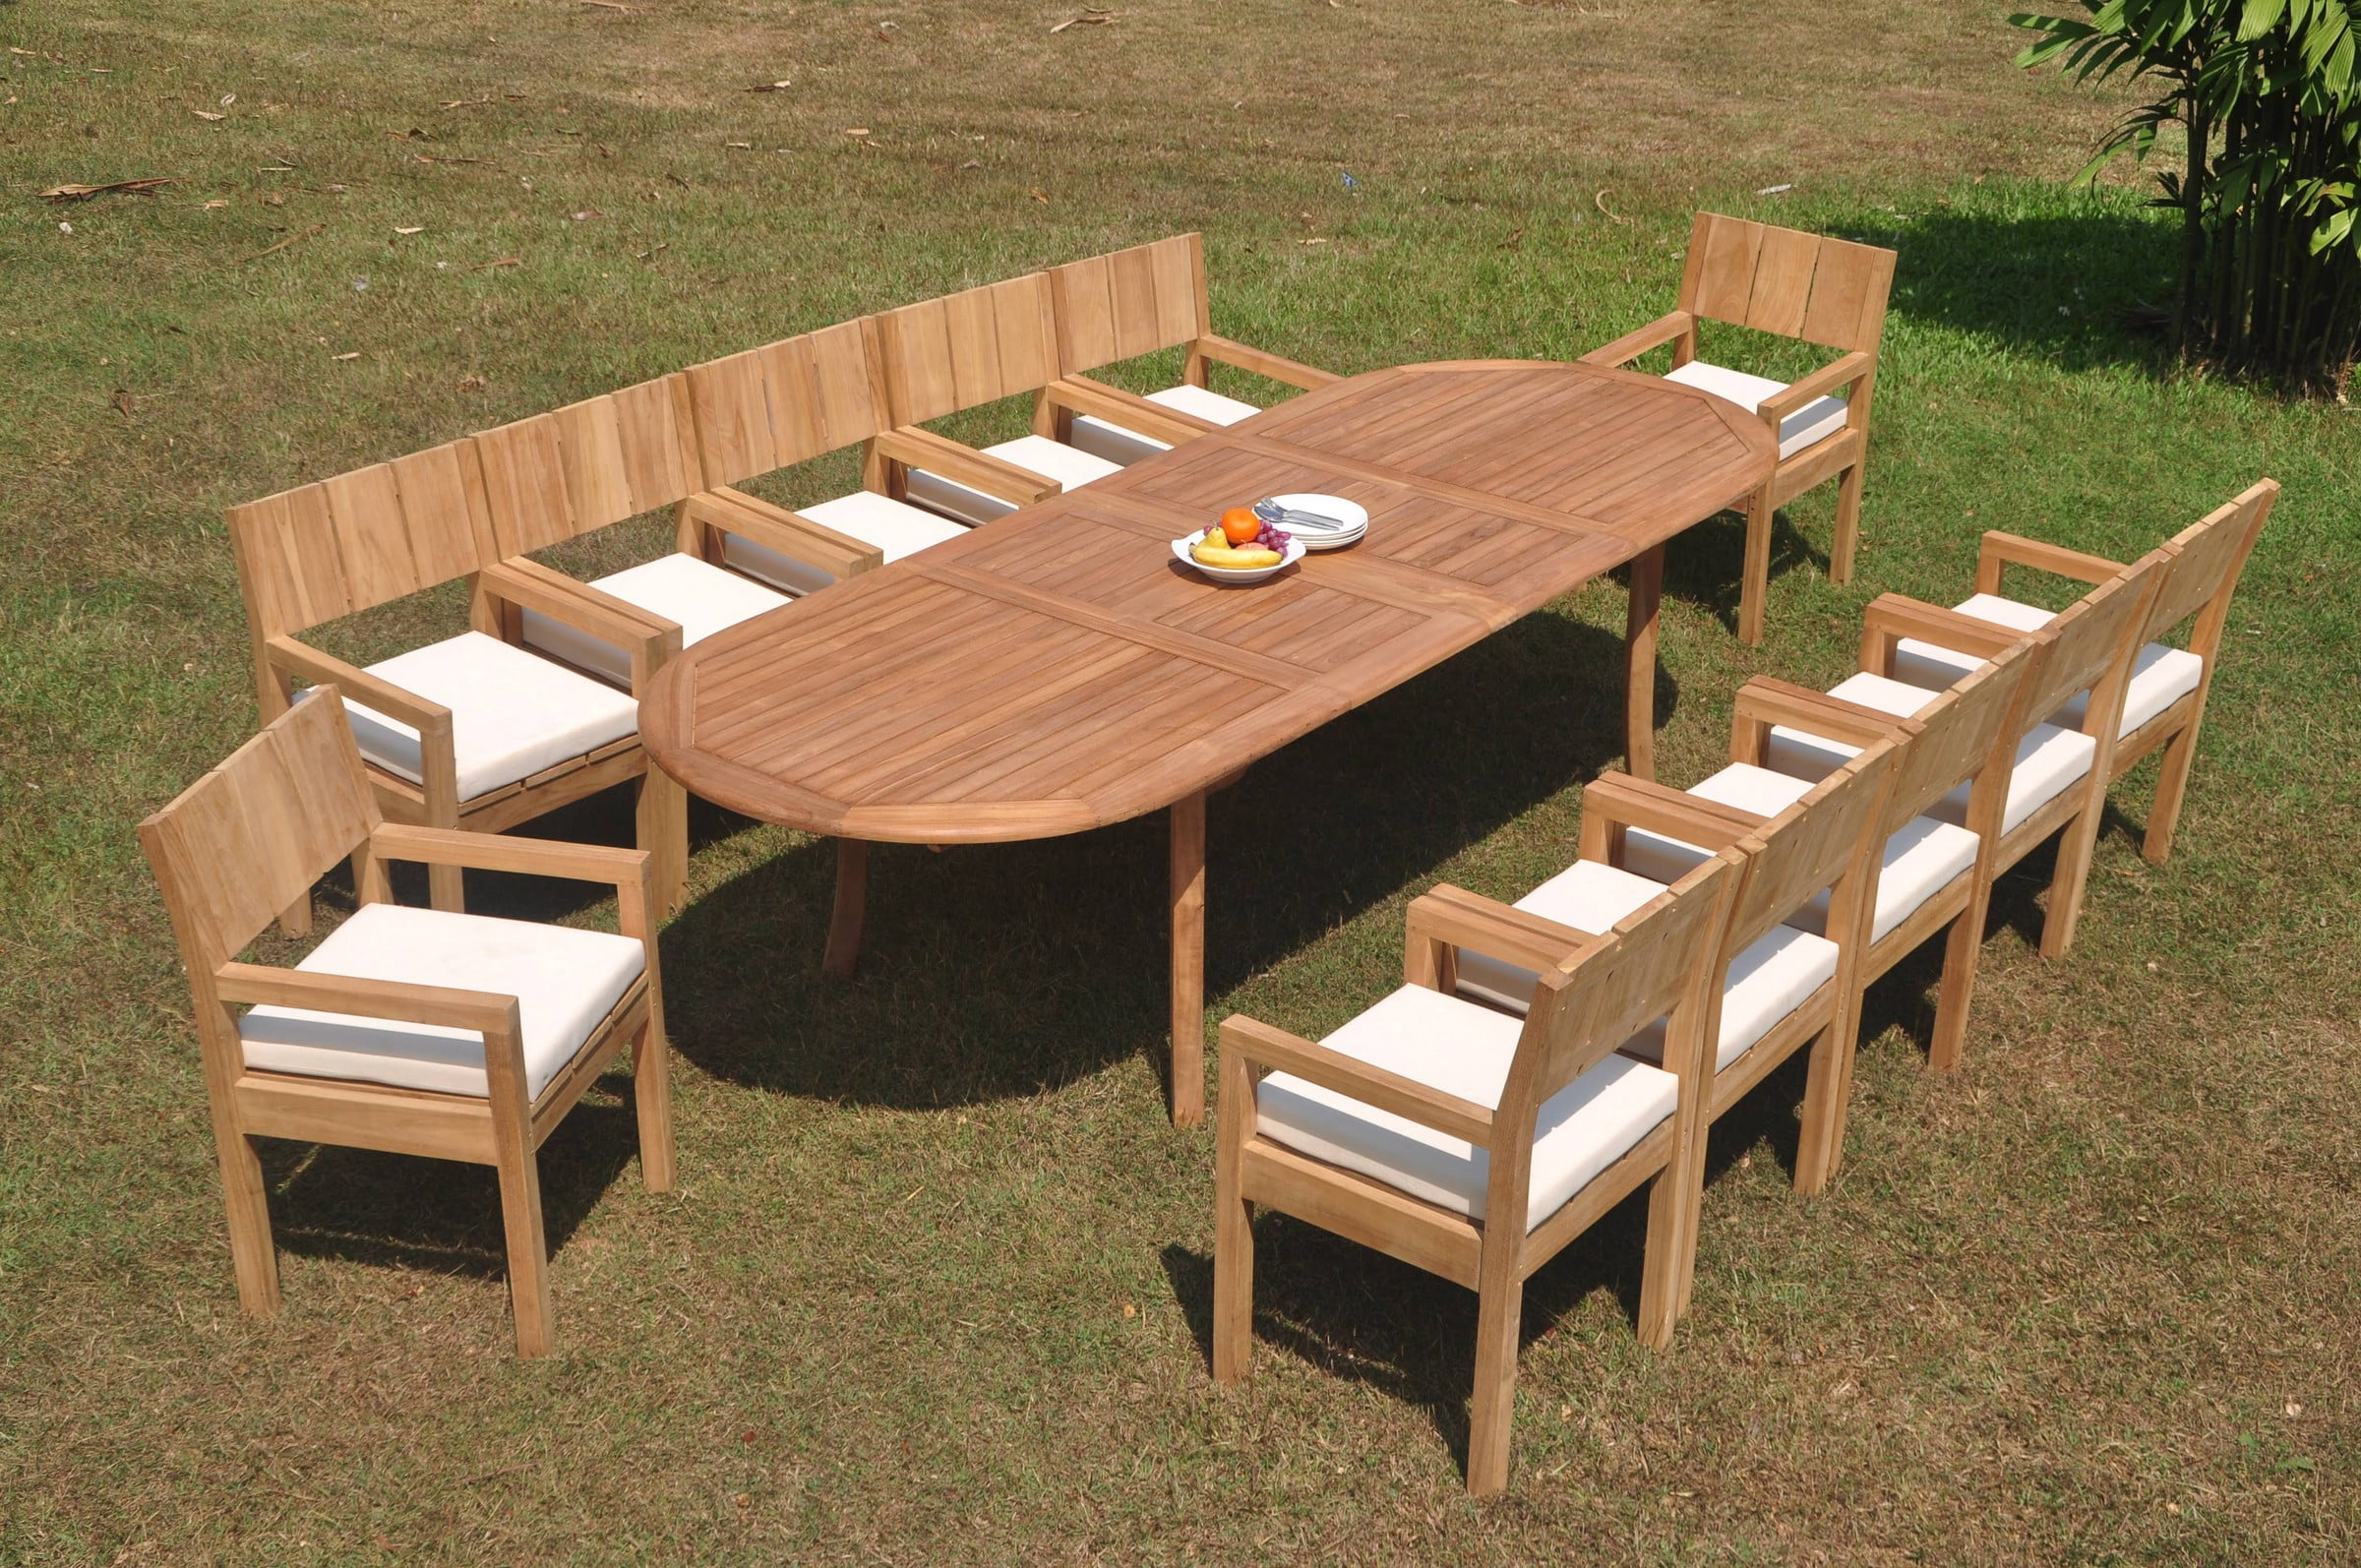 Teak Outdoor Furniture Sets For Every Garden Style